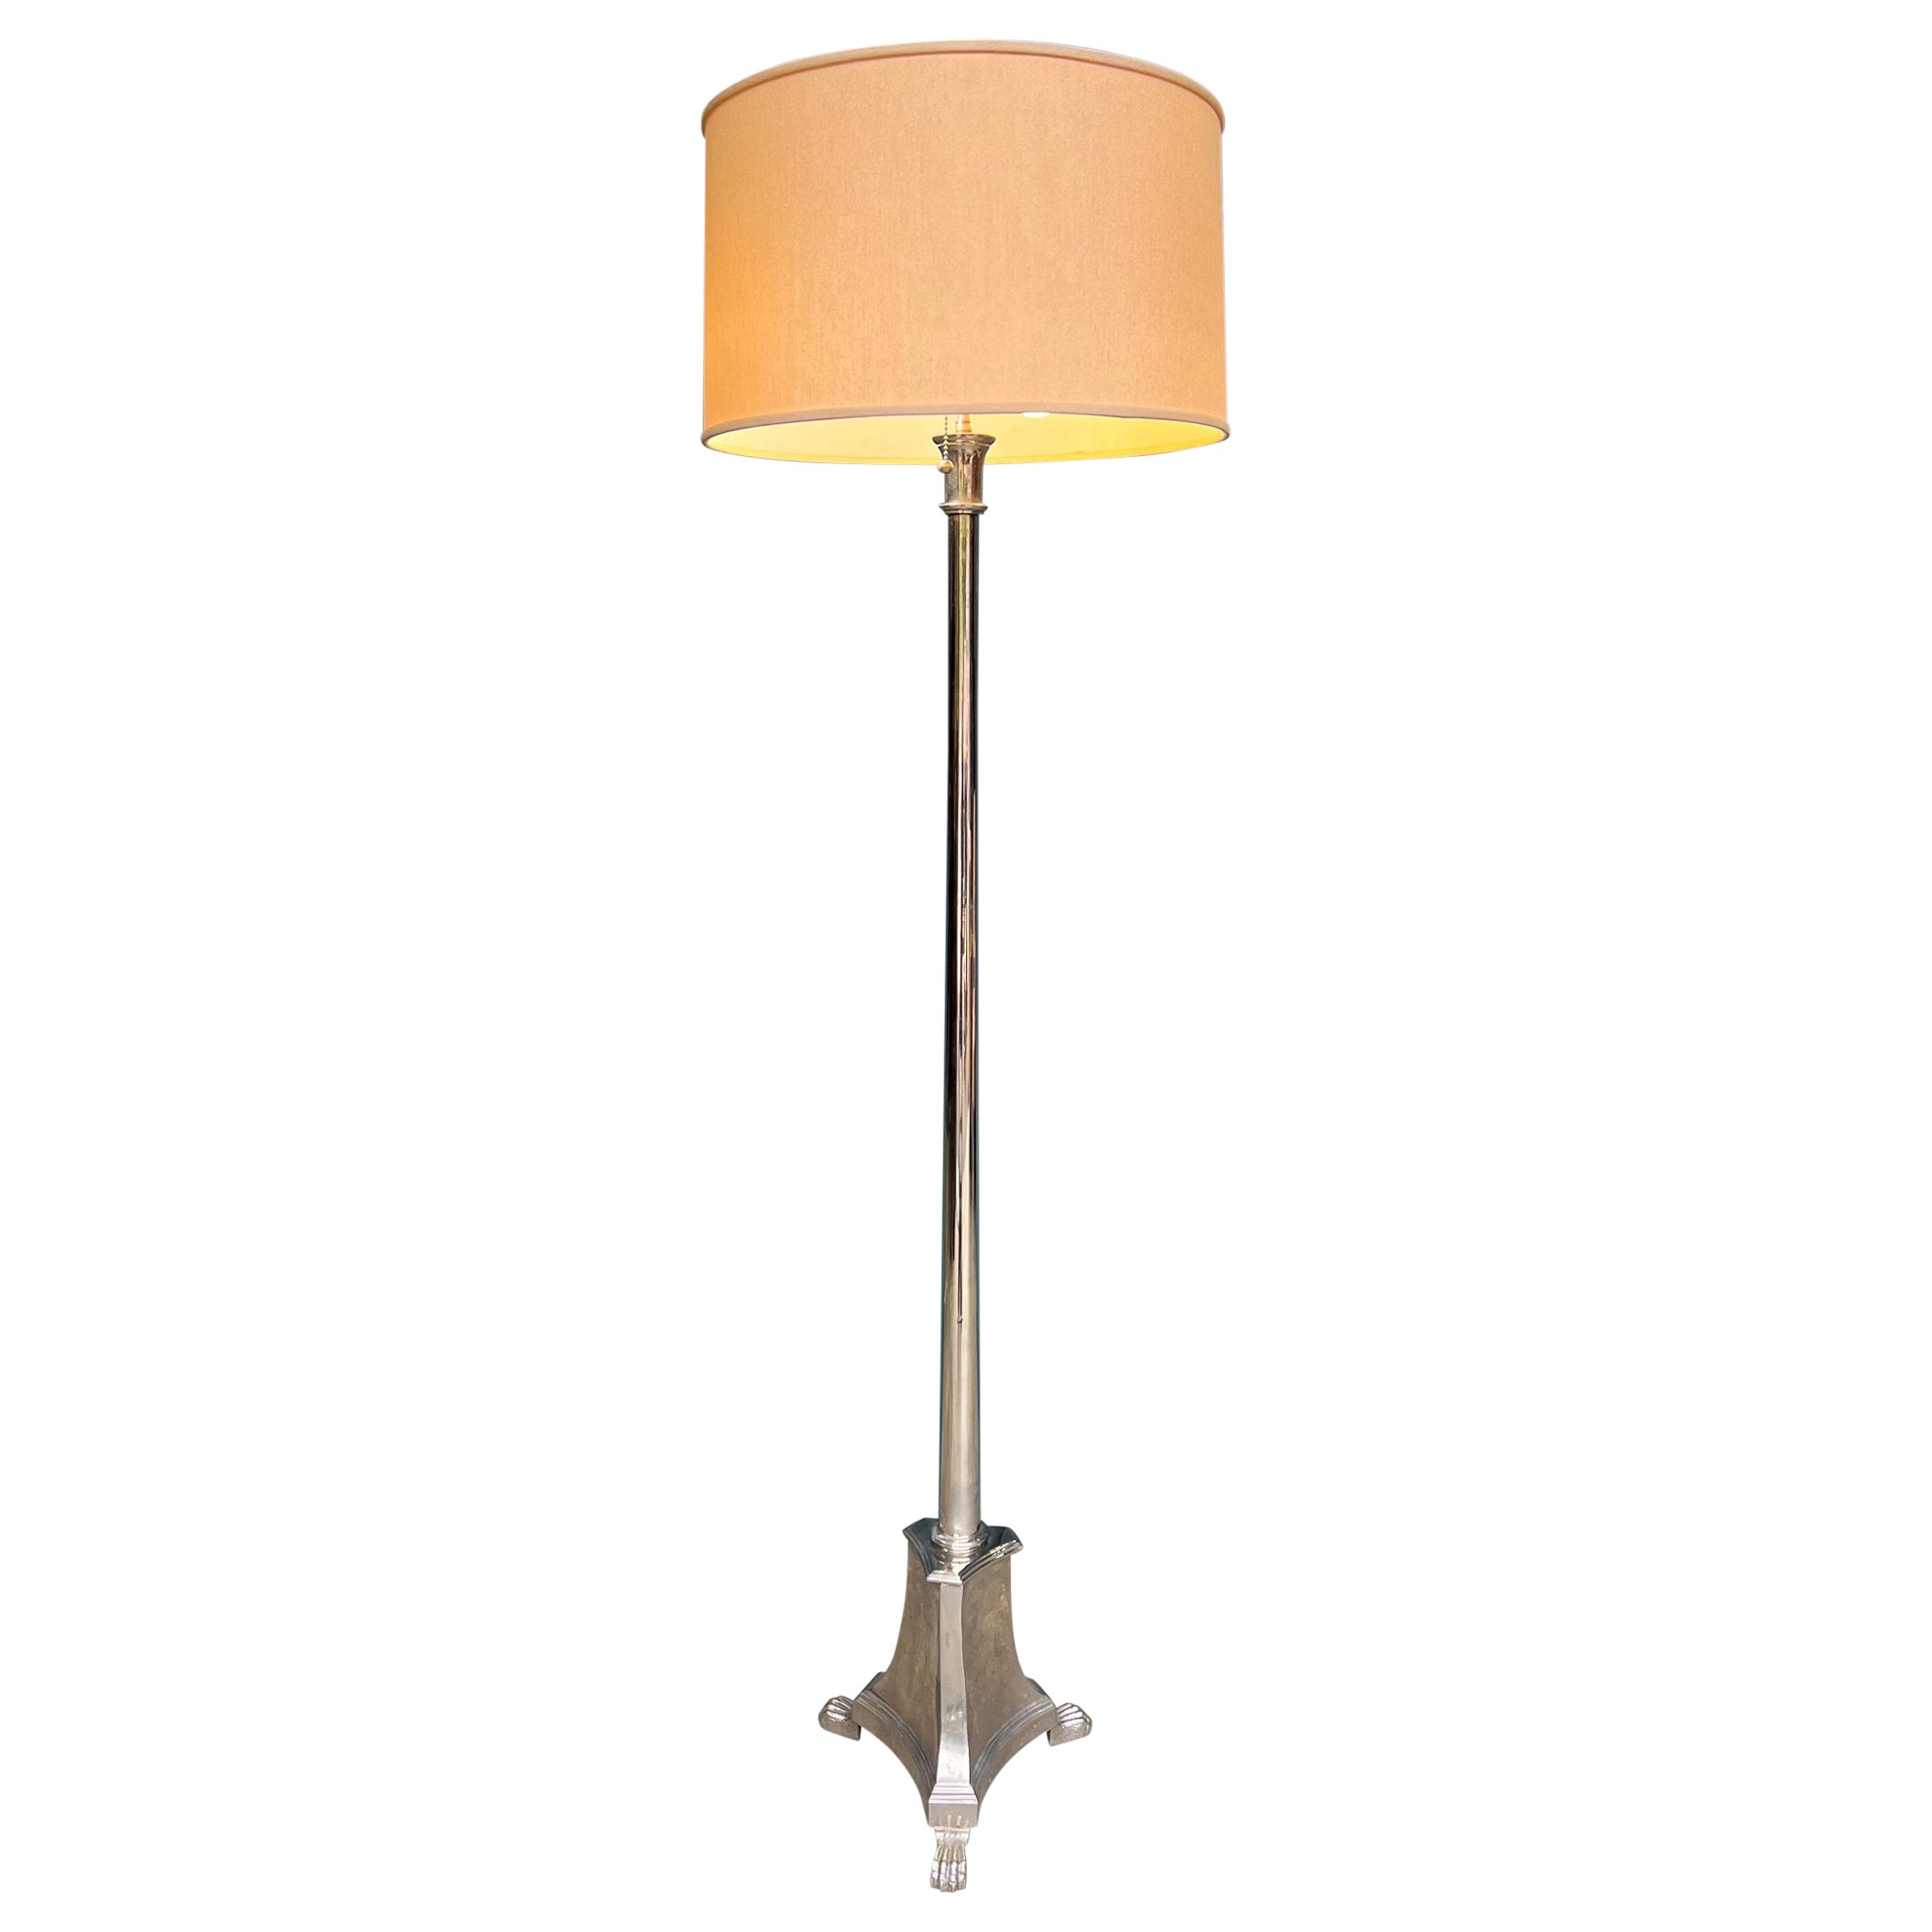 French 1940s Neoclassical Style Nickel-Plated Floor Lamp For Sale